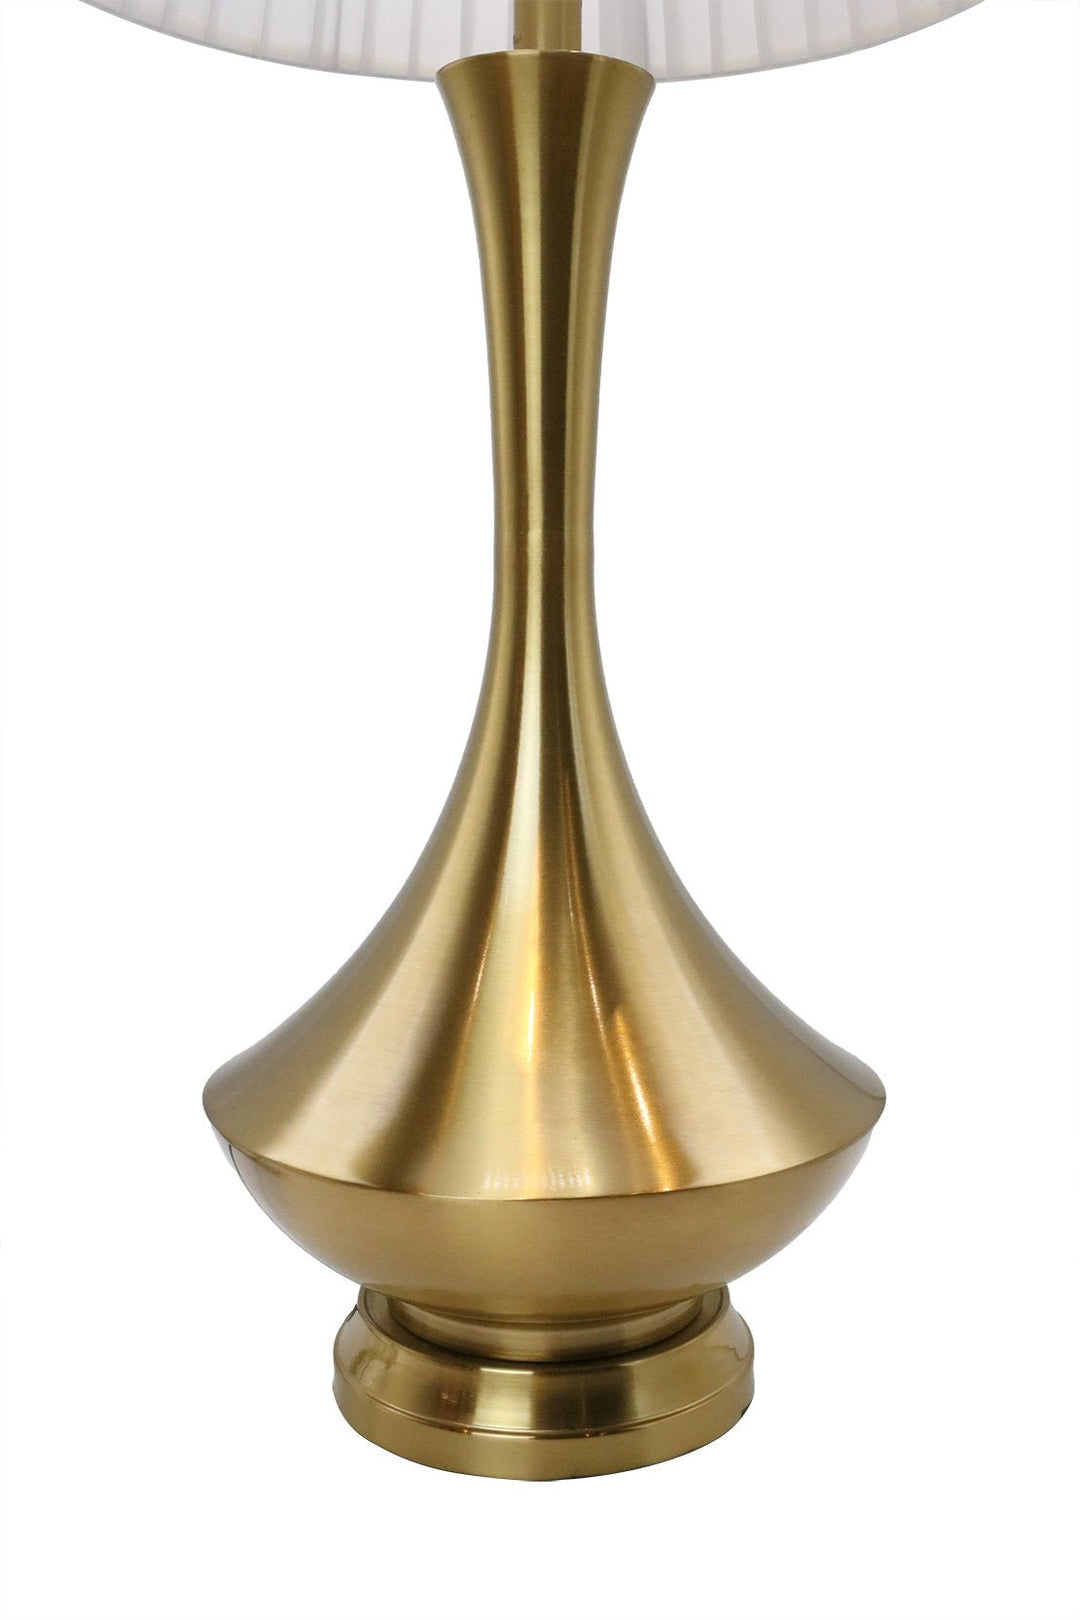 Marble Brass Table Lamp With White Drum - V Surfaces